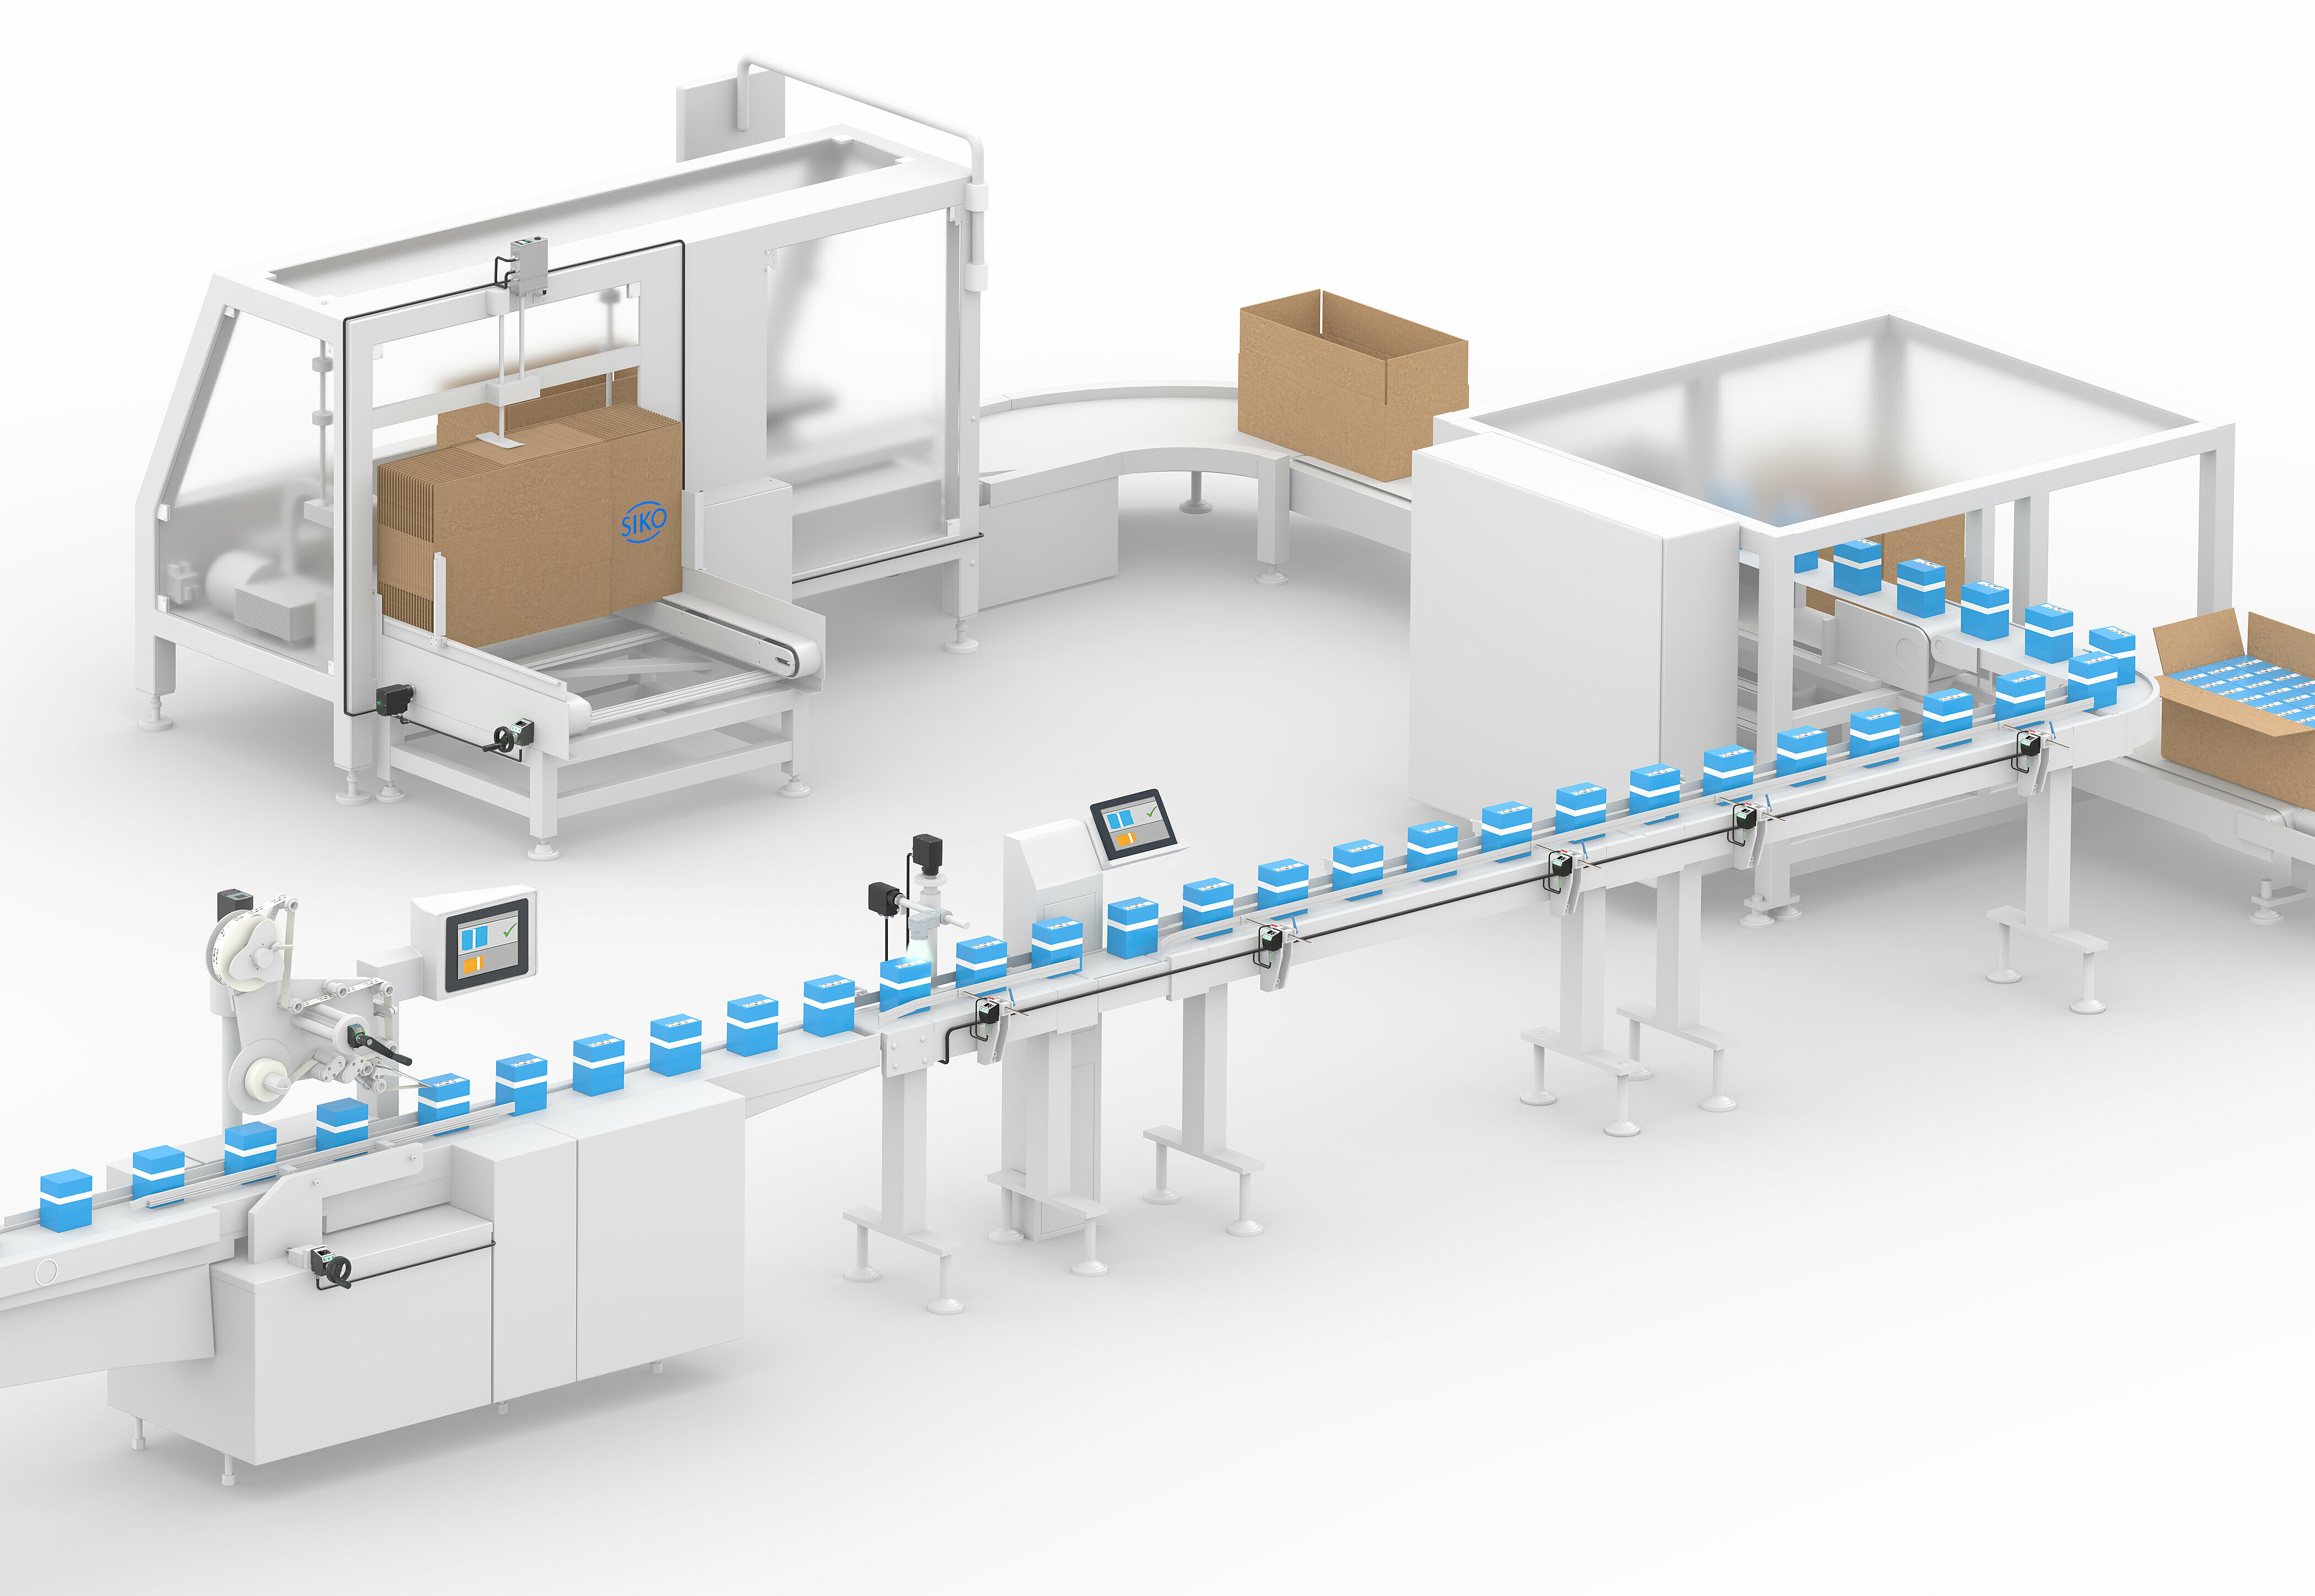 Packaging line equipped with SIKO positioning systems